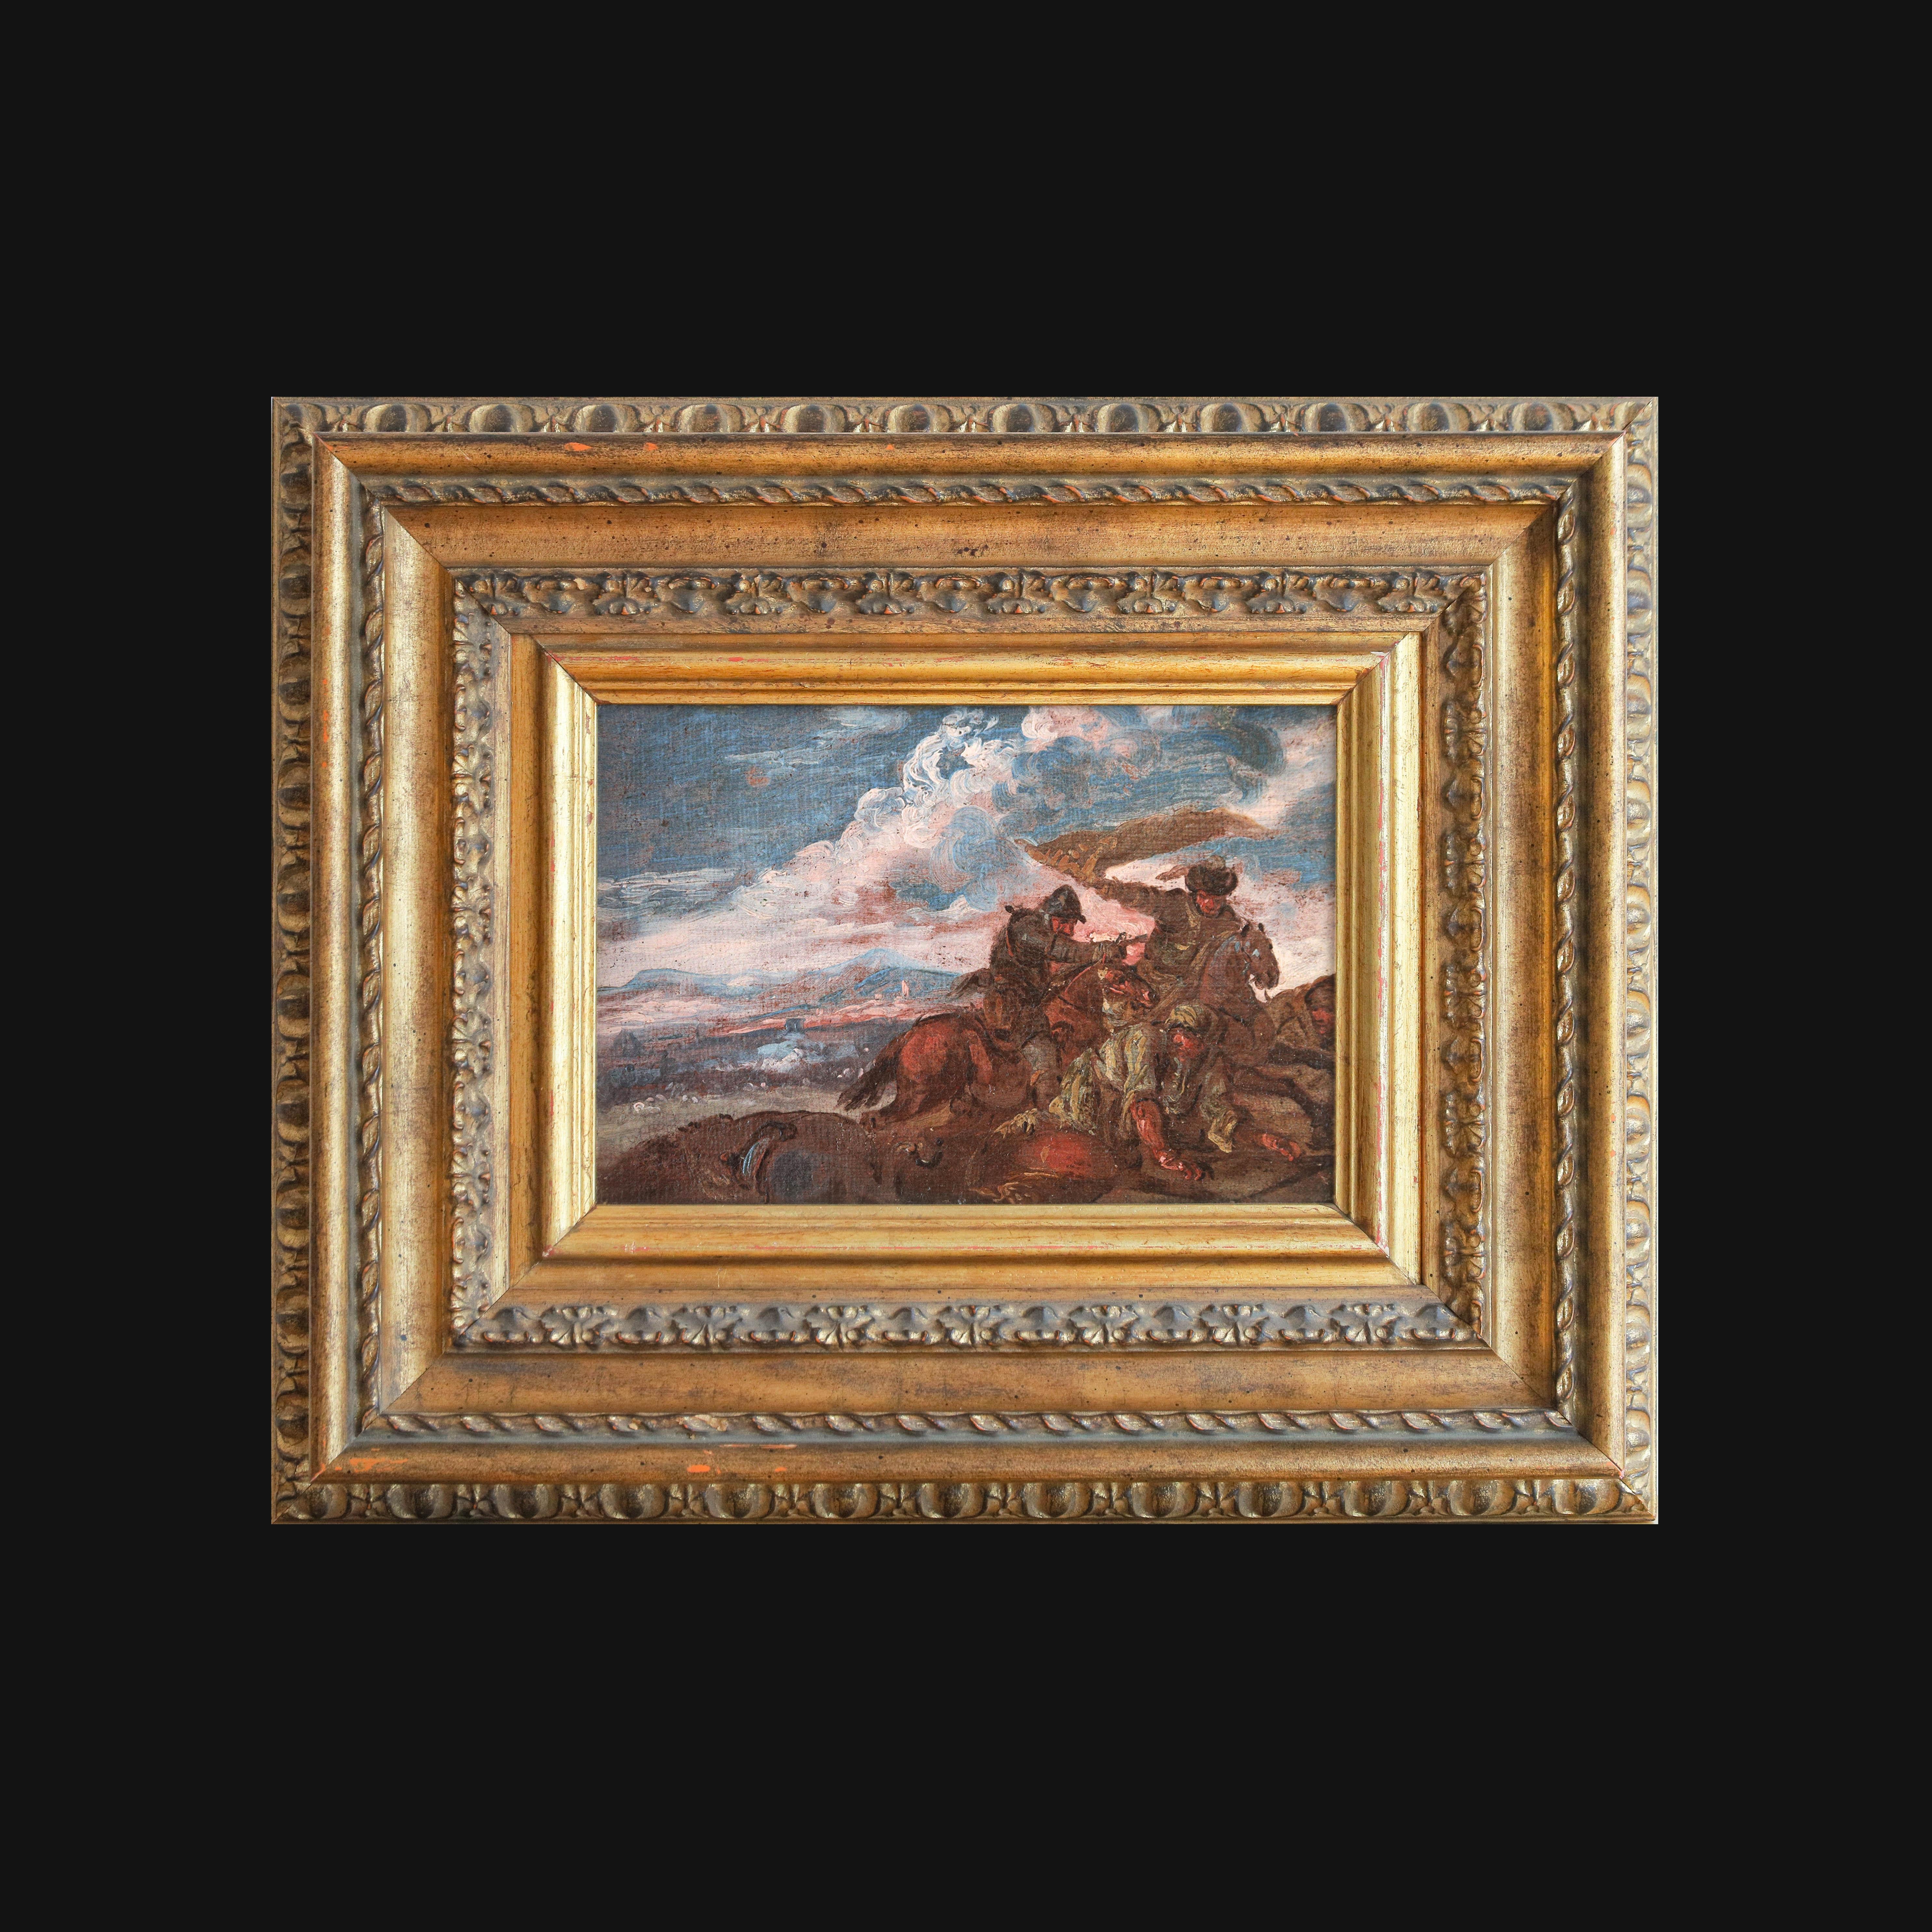 Battle piece painting with two rider soldiers  - Brown Figurative Painting by Unknown